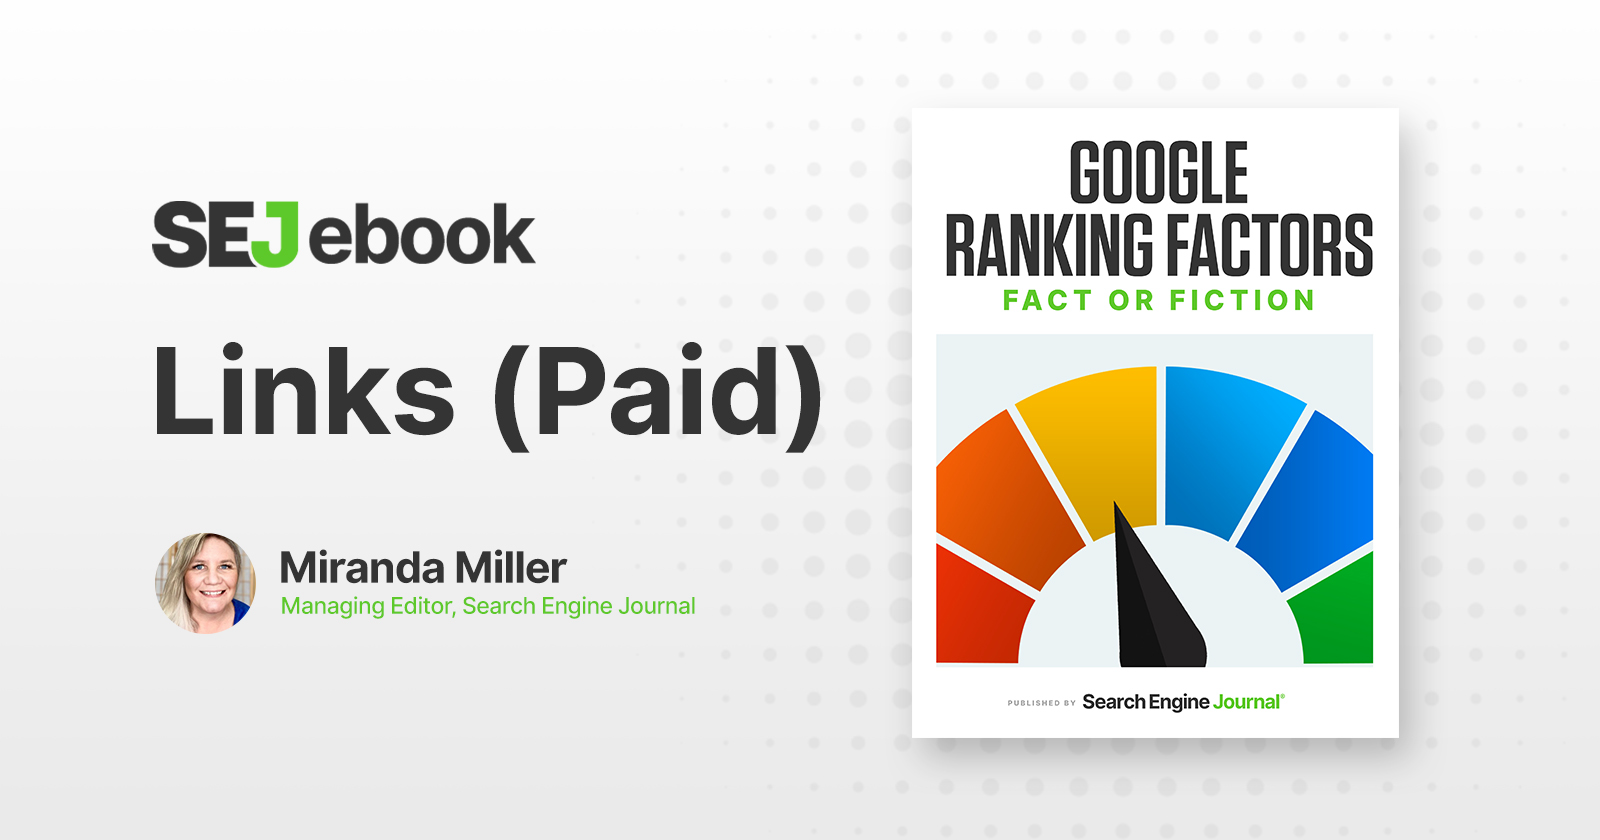 Are Paid Links A Google Ranking Factor?